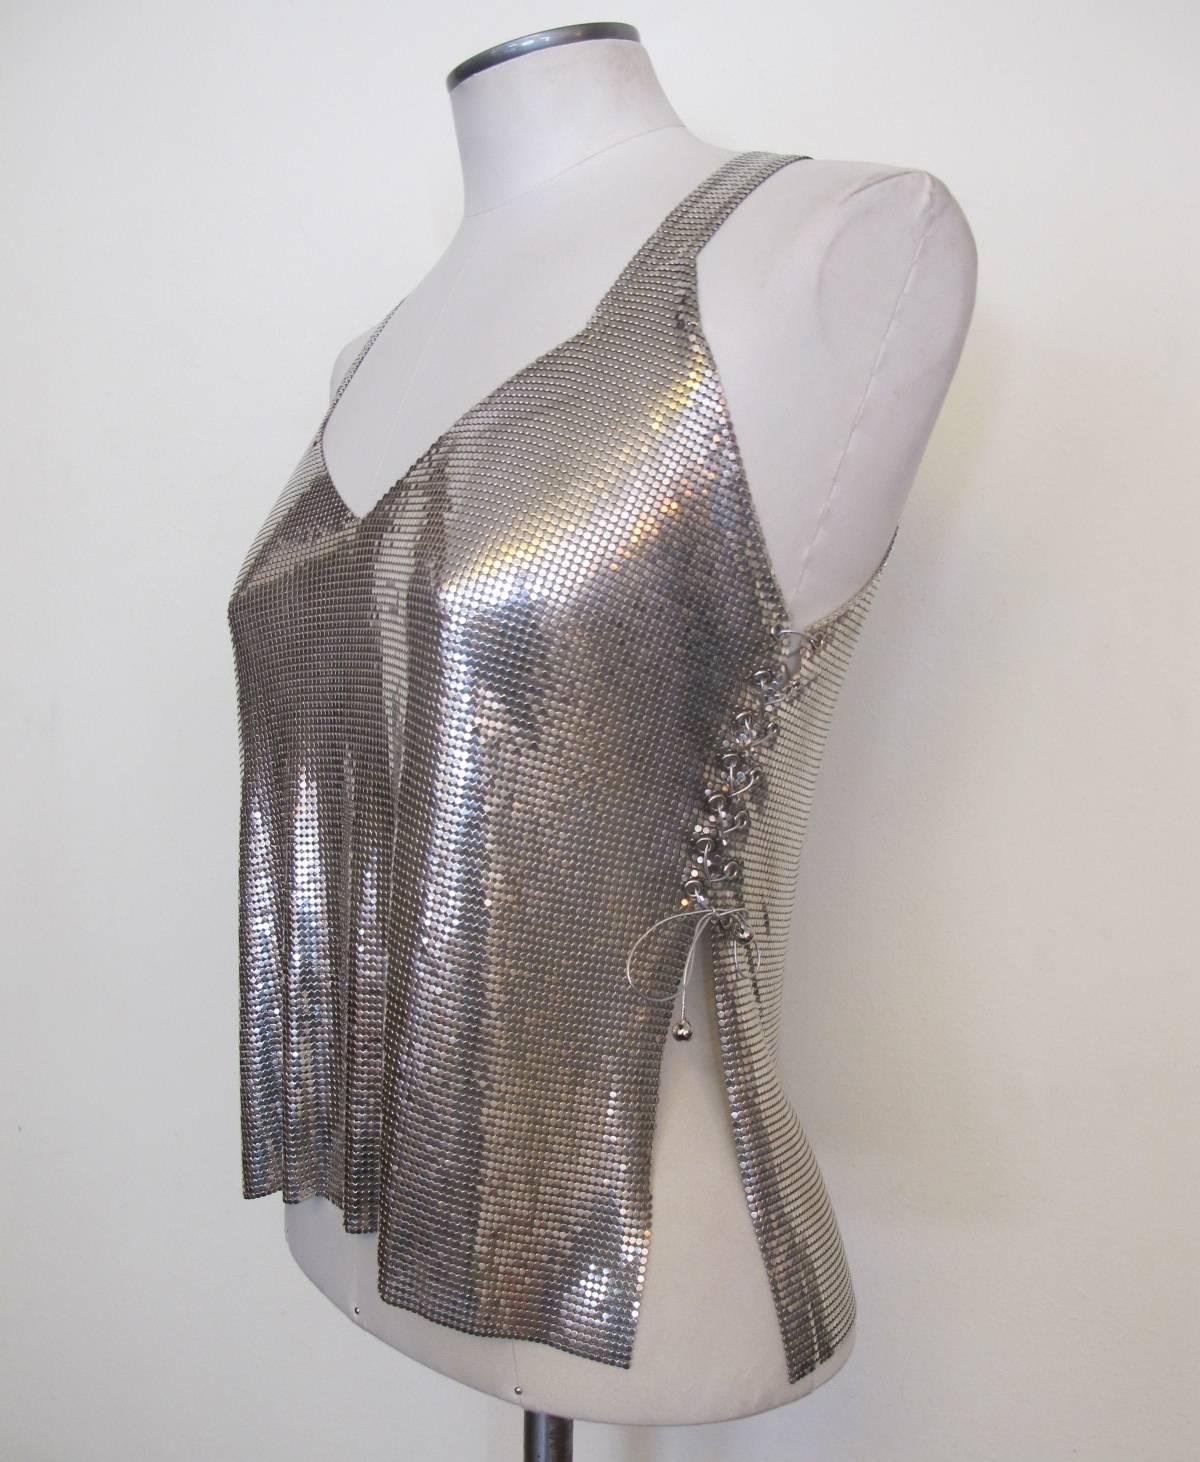 Paco Rabanne Chic Silver Metal Mesh Sleeveless Tank Top In Excellent Condition For Sale In San Francisco, CA